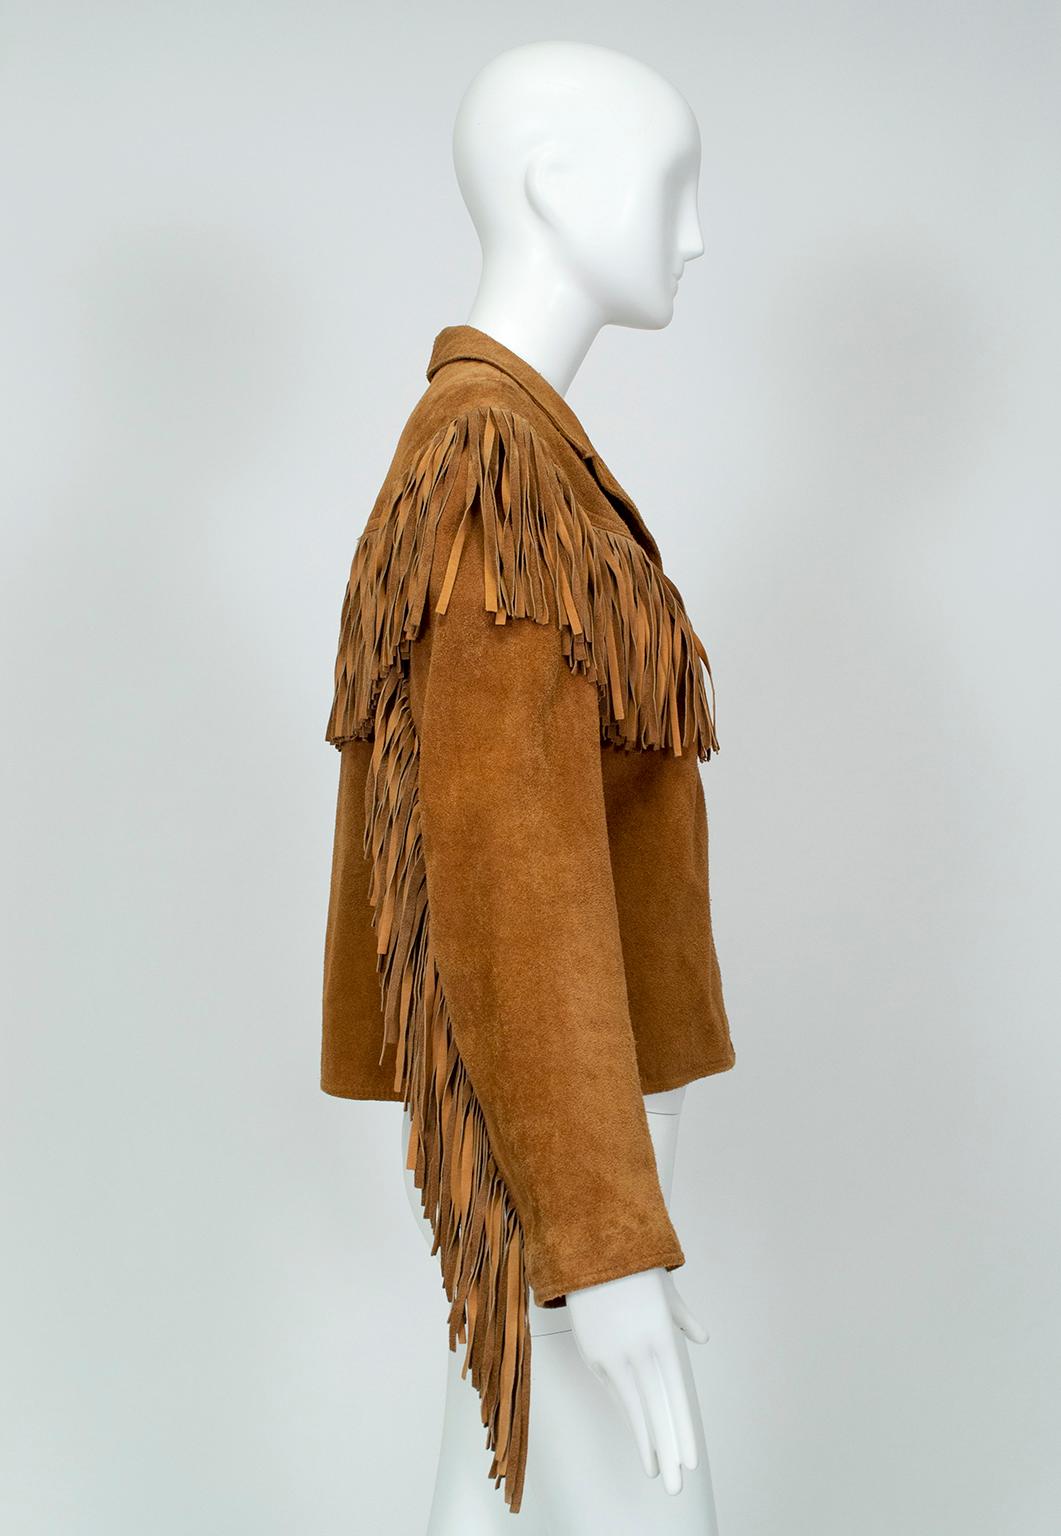 Dive head first into Western Americana with an iconic fringed suede cowboy shirt jacket. A little leaner and lighter than traditional outerwear, this piece is supple enough to be worn tucked in or or left out 